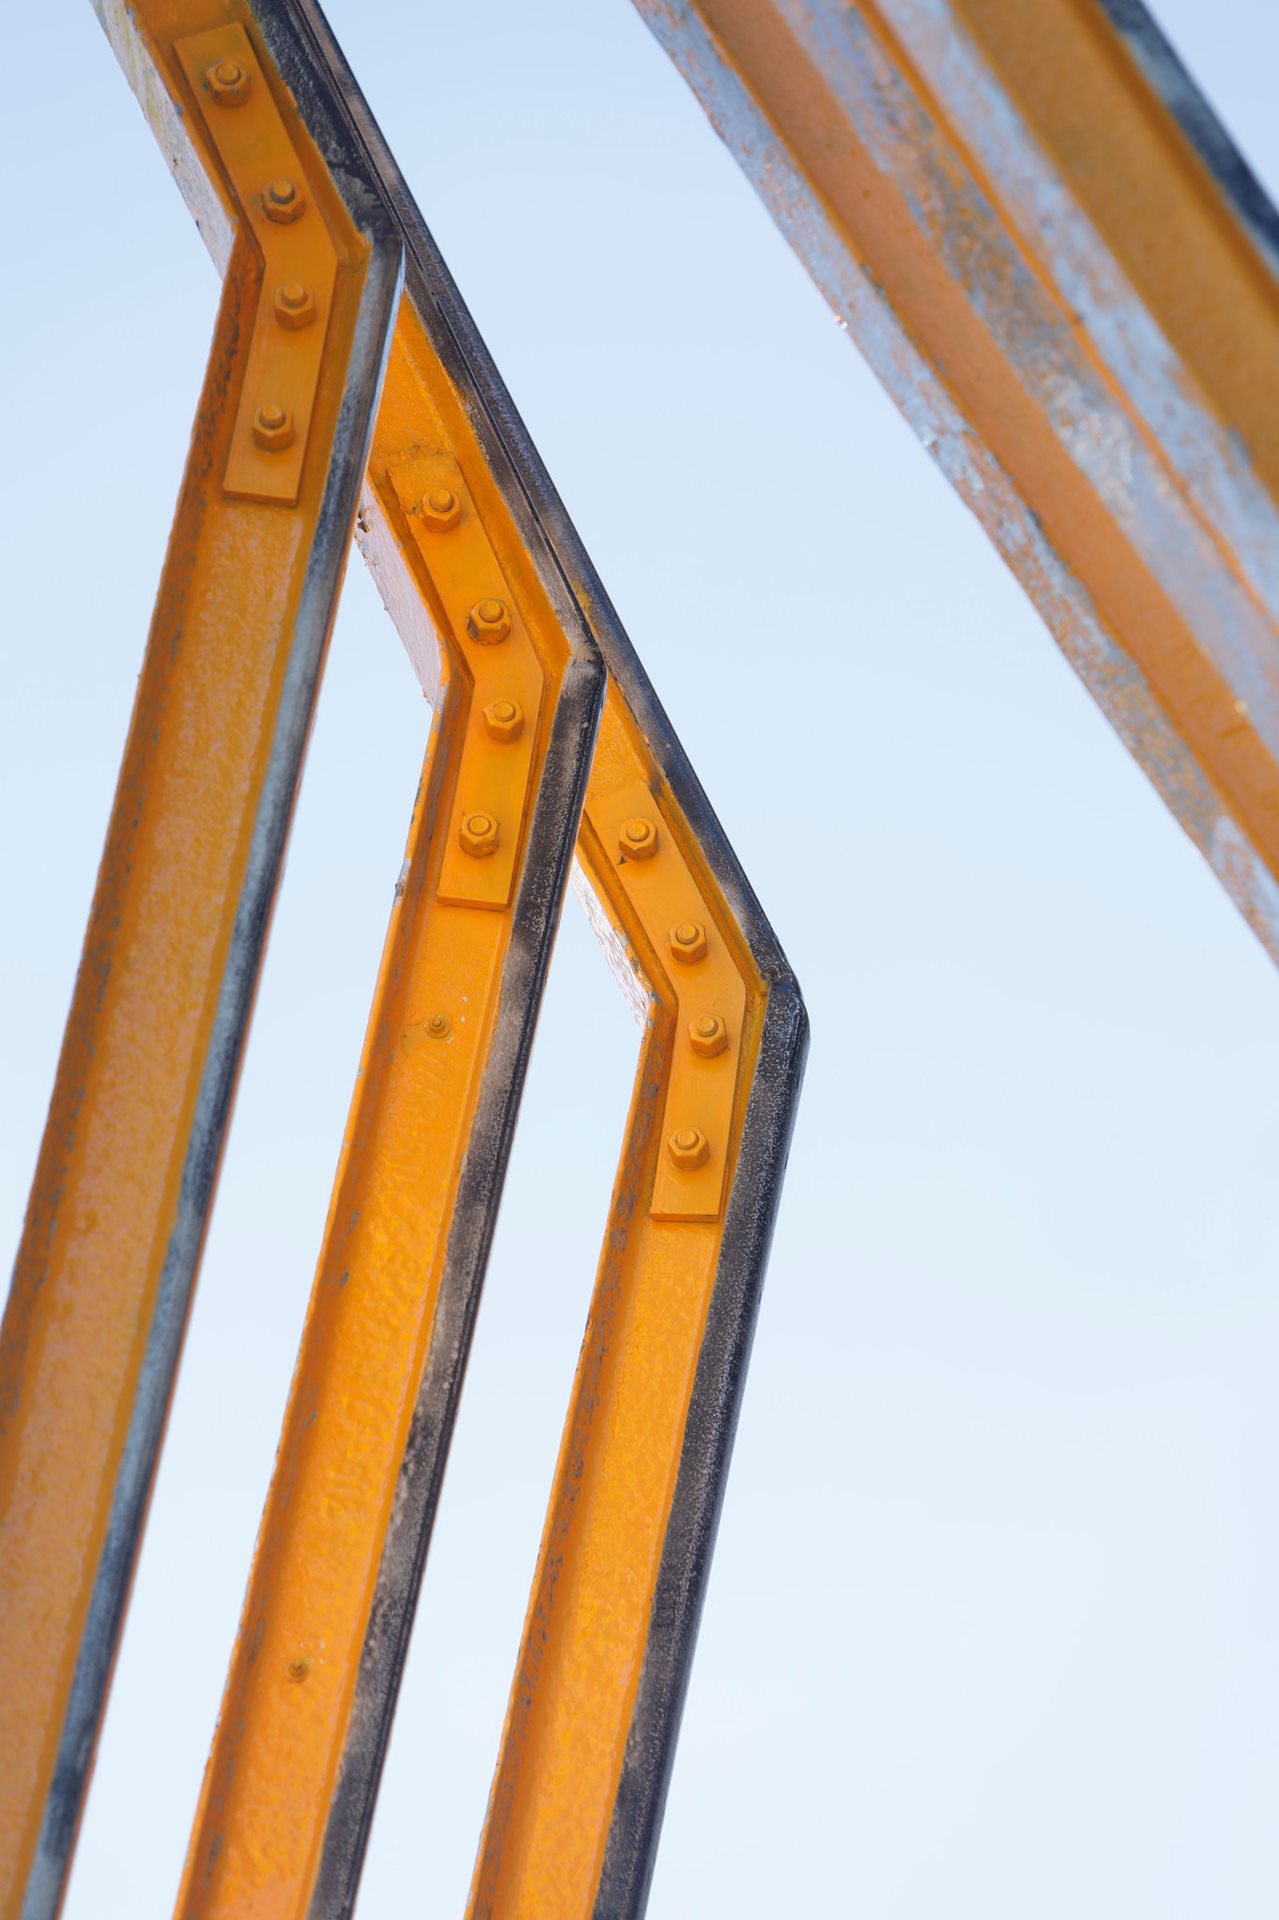 Close up image of the yellow painted railway steel components of 'The Rail' Artwork by VOXLAB